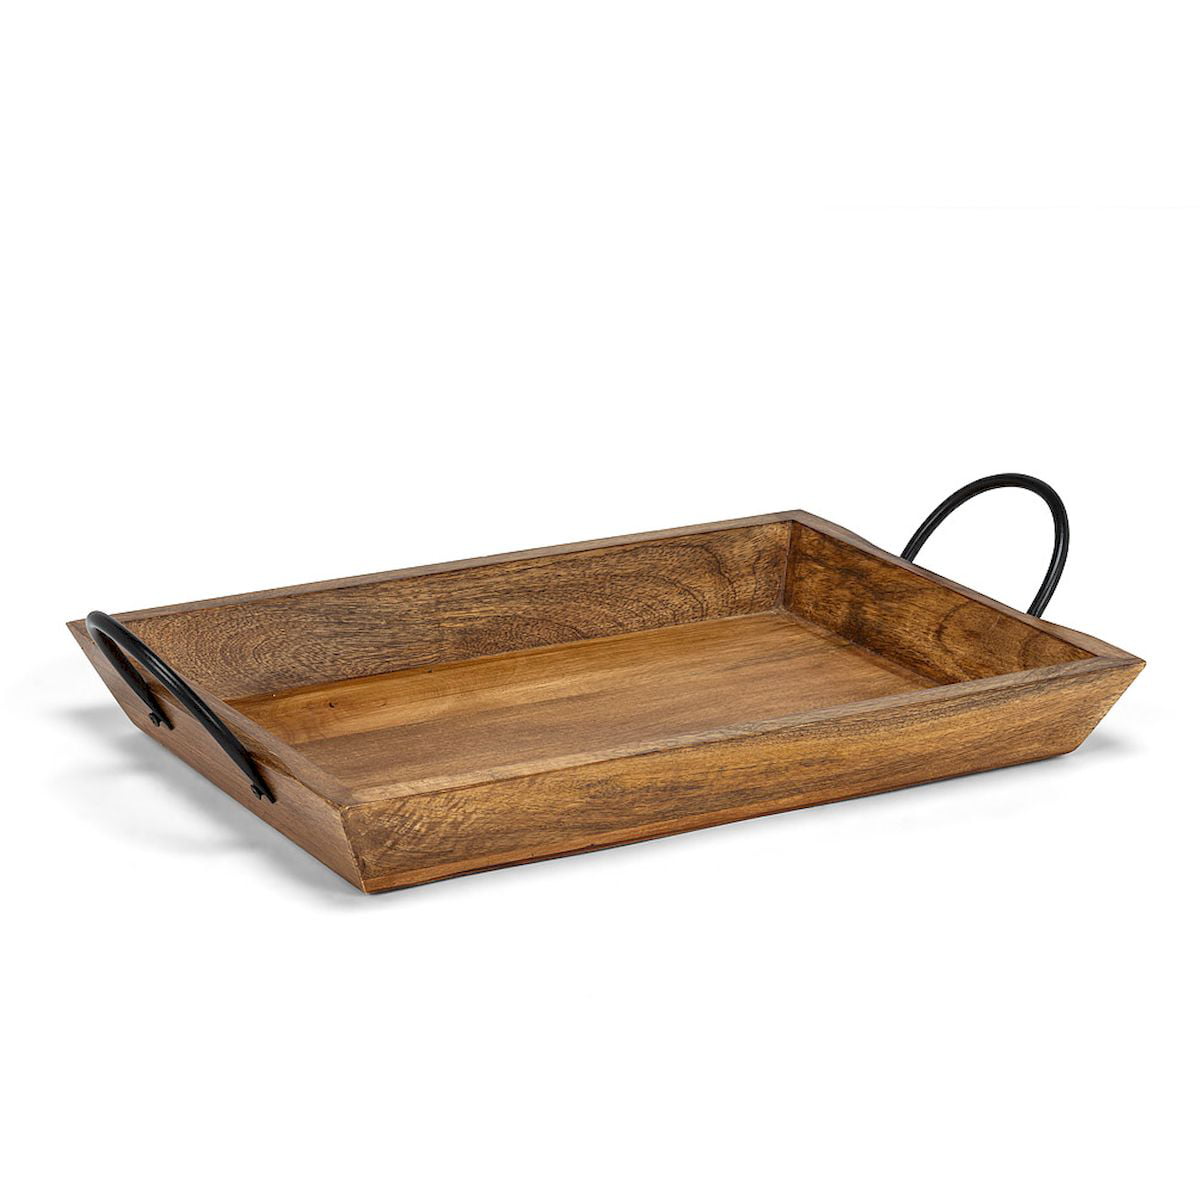 Set of 4 Large Rectangle Tray with Handles - Walmart.com